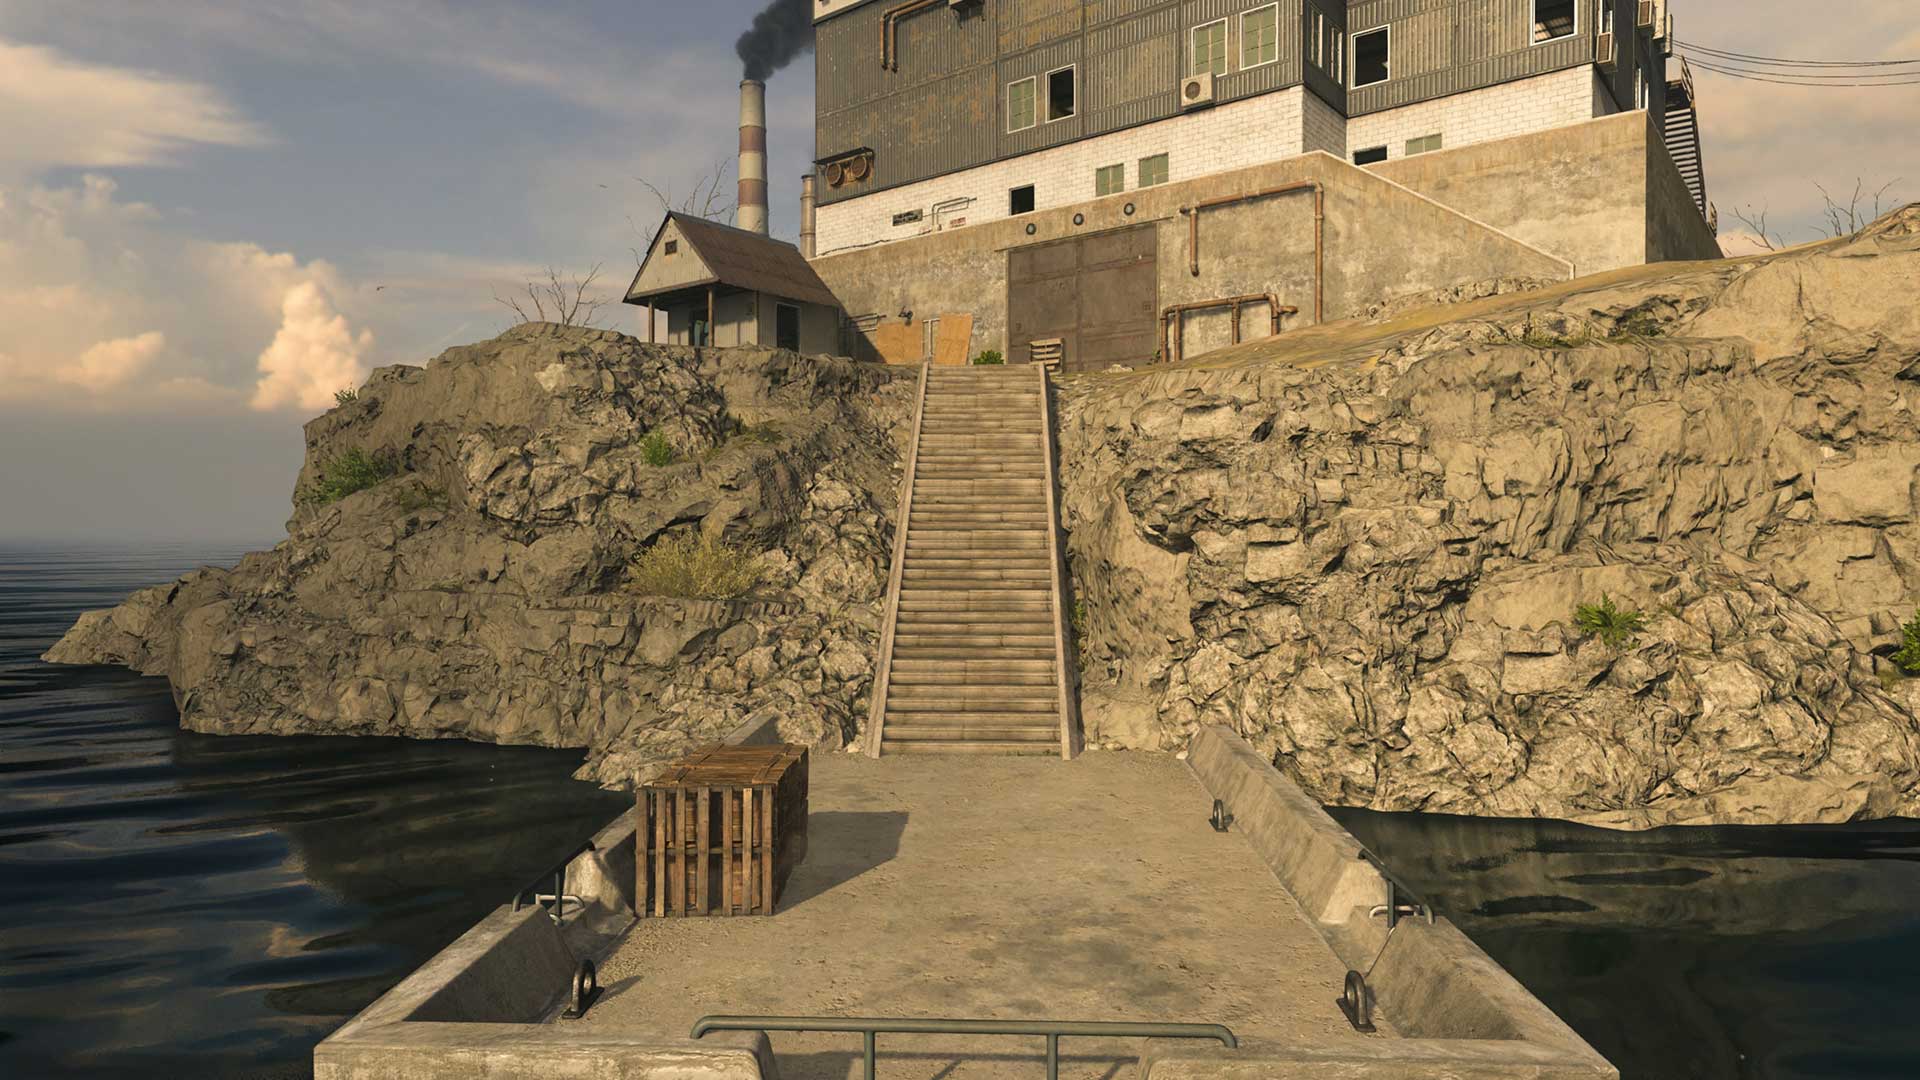 All locations on Rebirth Island in Call of Duty Warzone